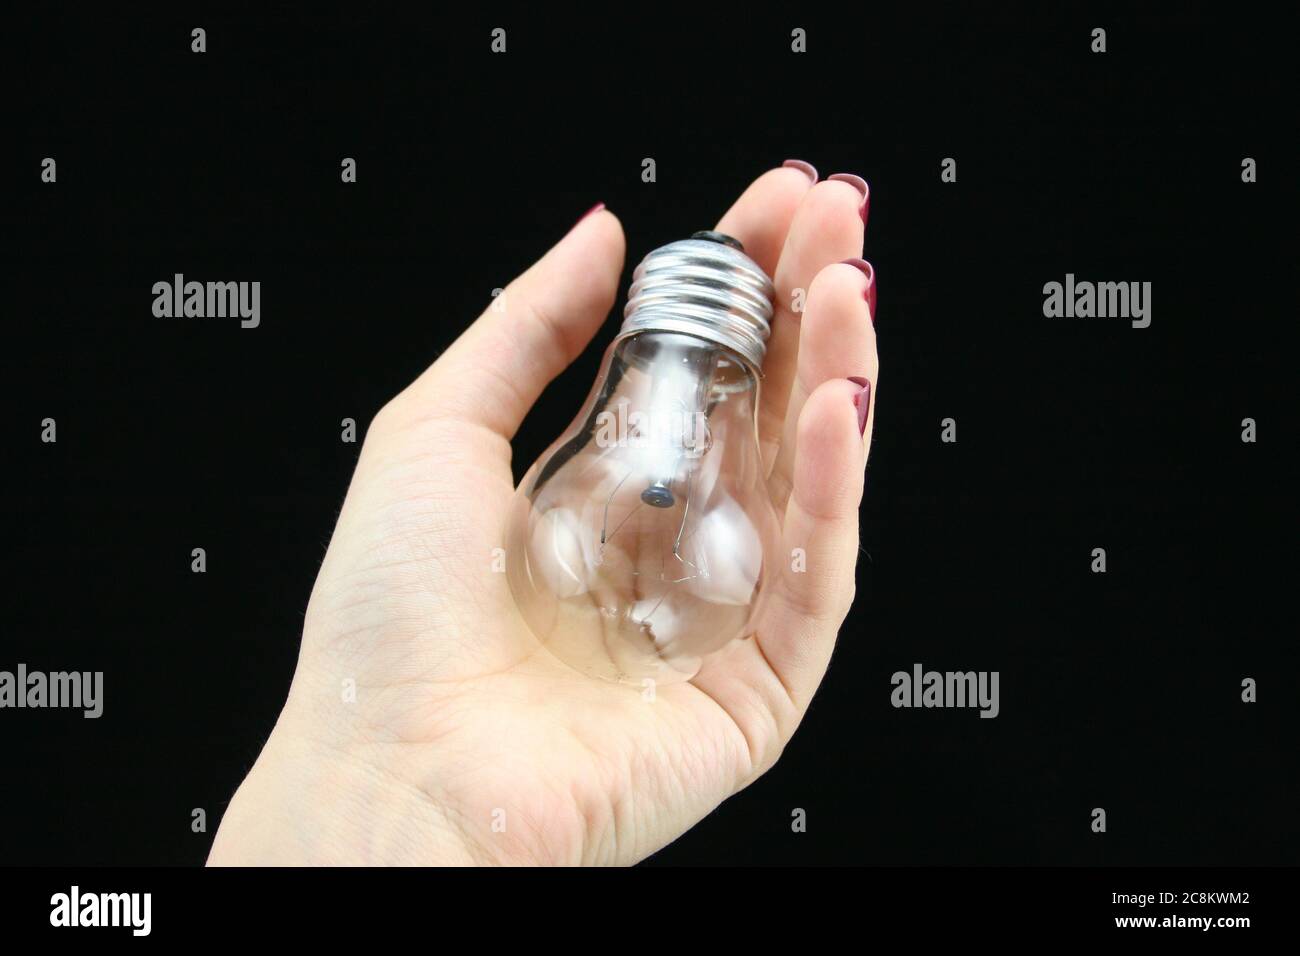 woman's hand holding a clear light bulb with a black back ground. Stock Photo